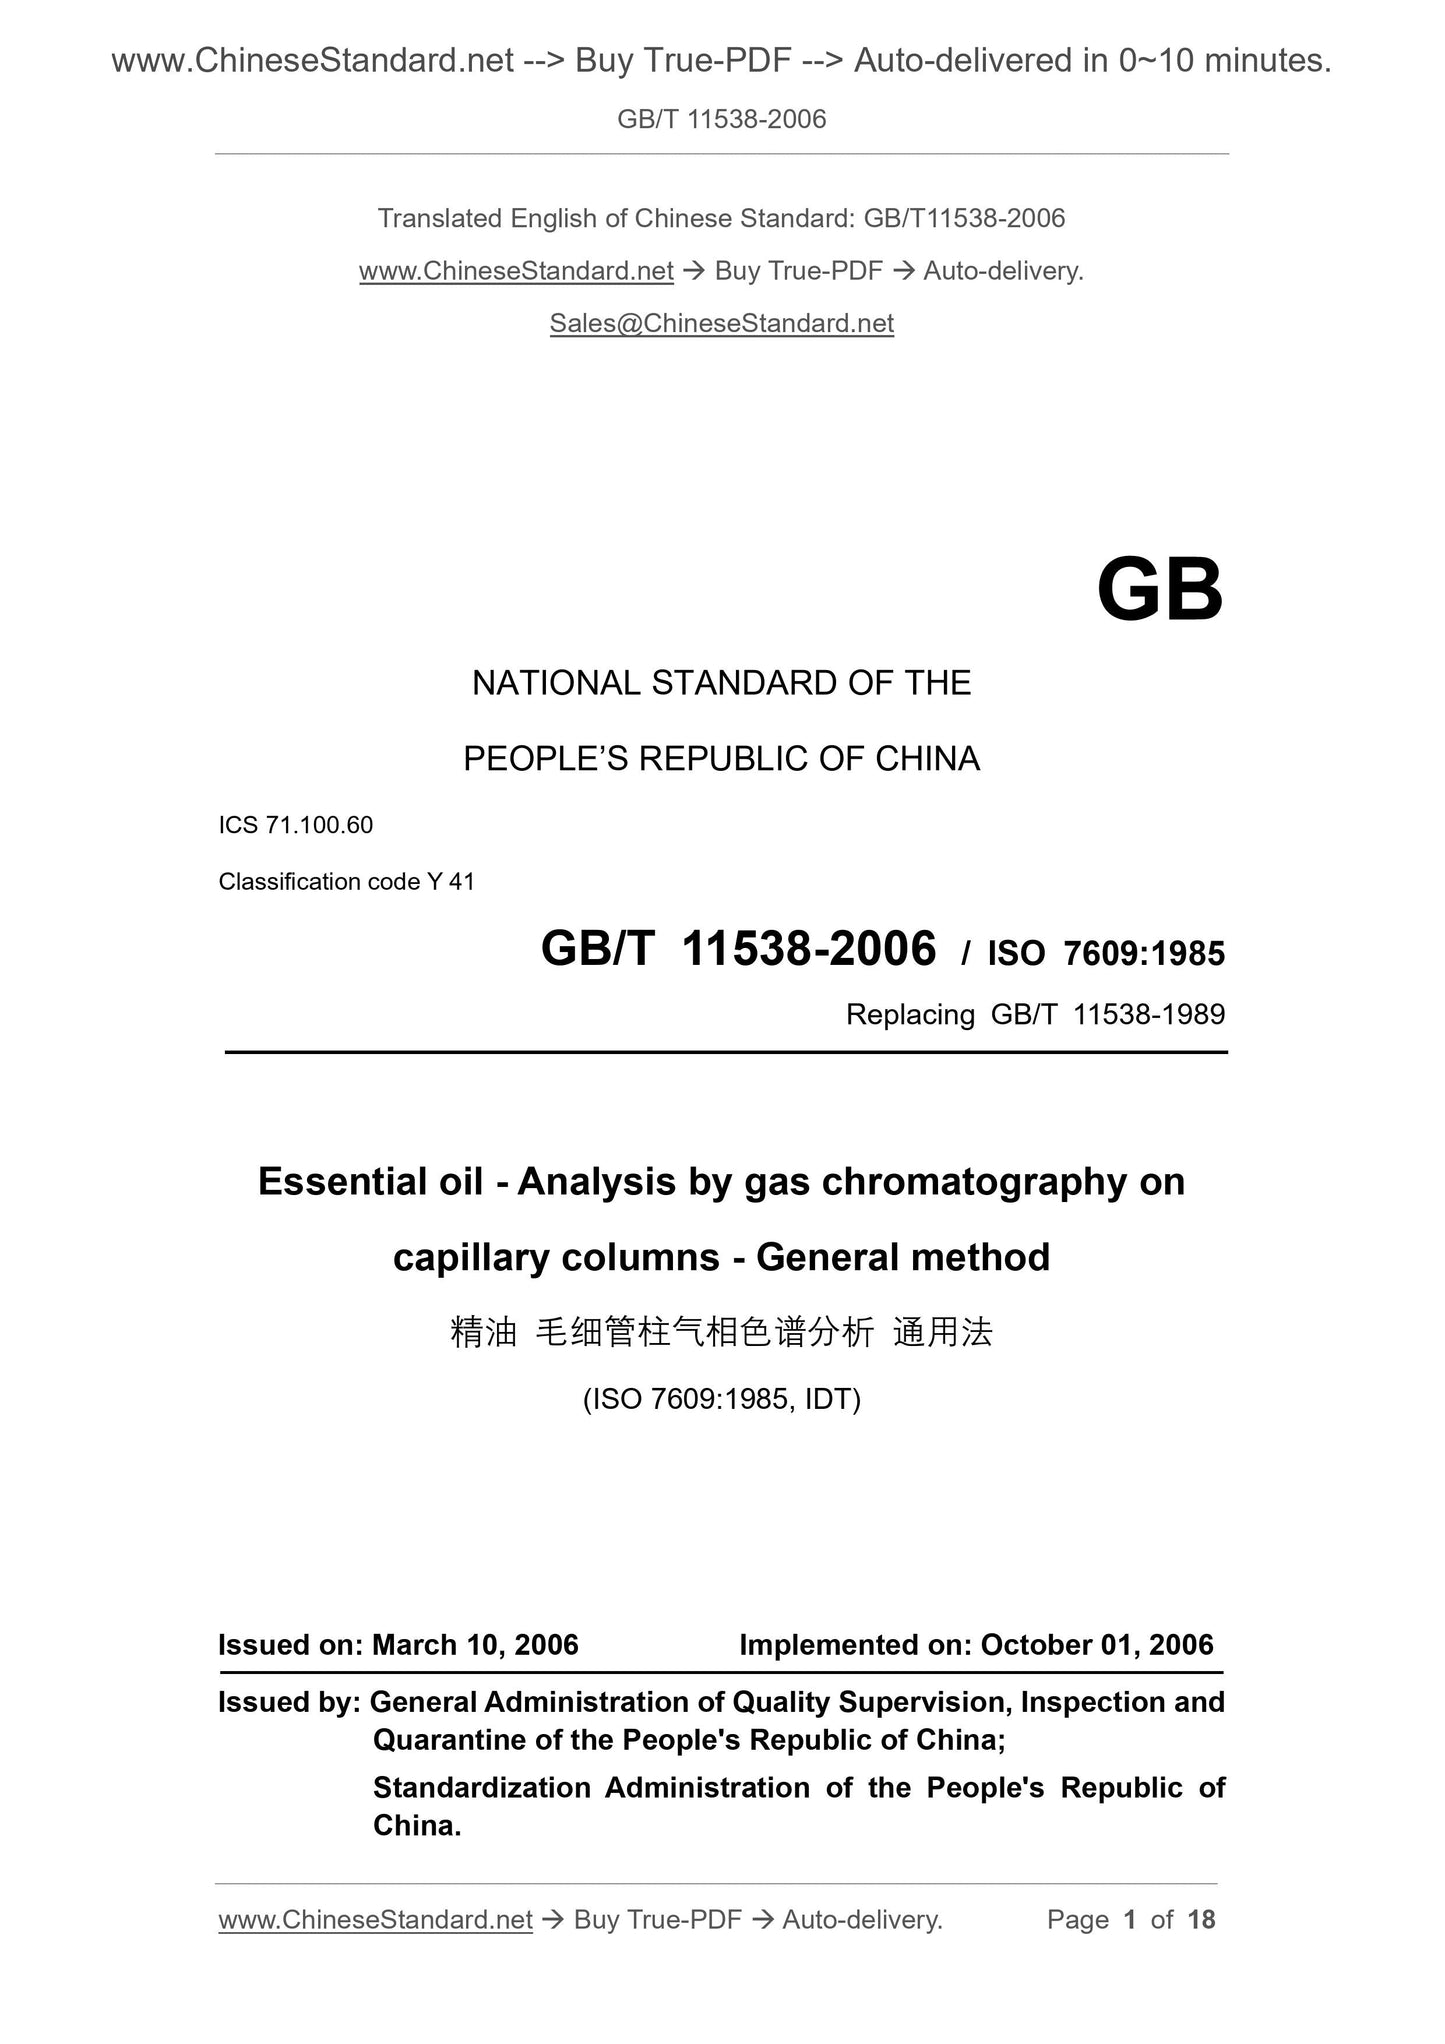 GB/T 11538-2006 Page 1